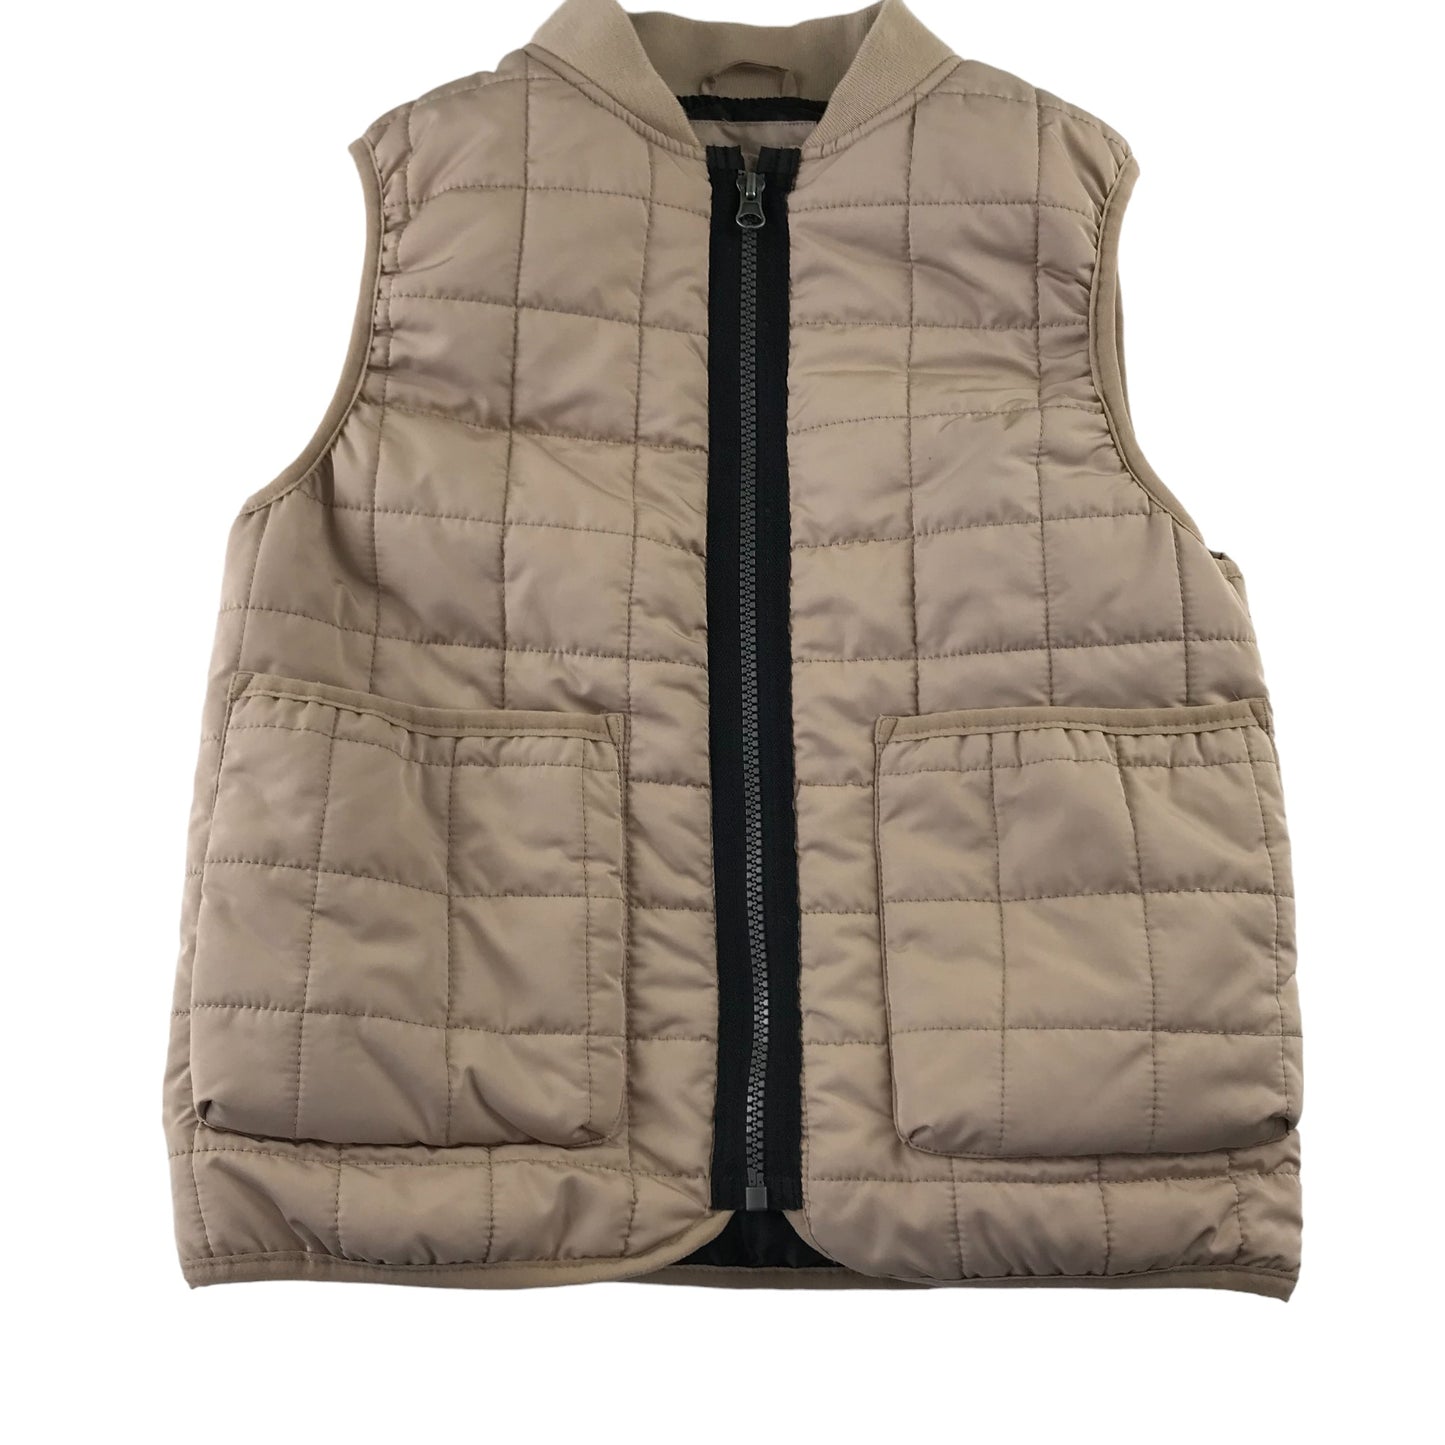 Primark gilet 8-9 years light beige quilted lightly padded